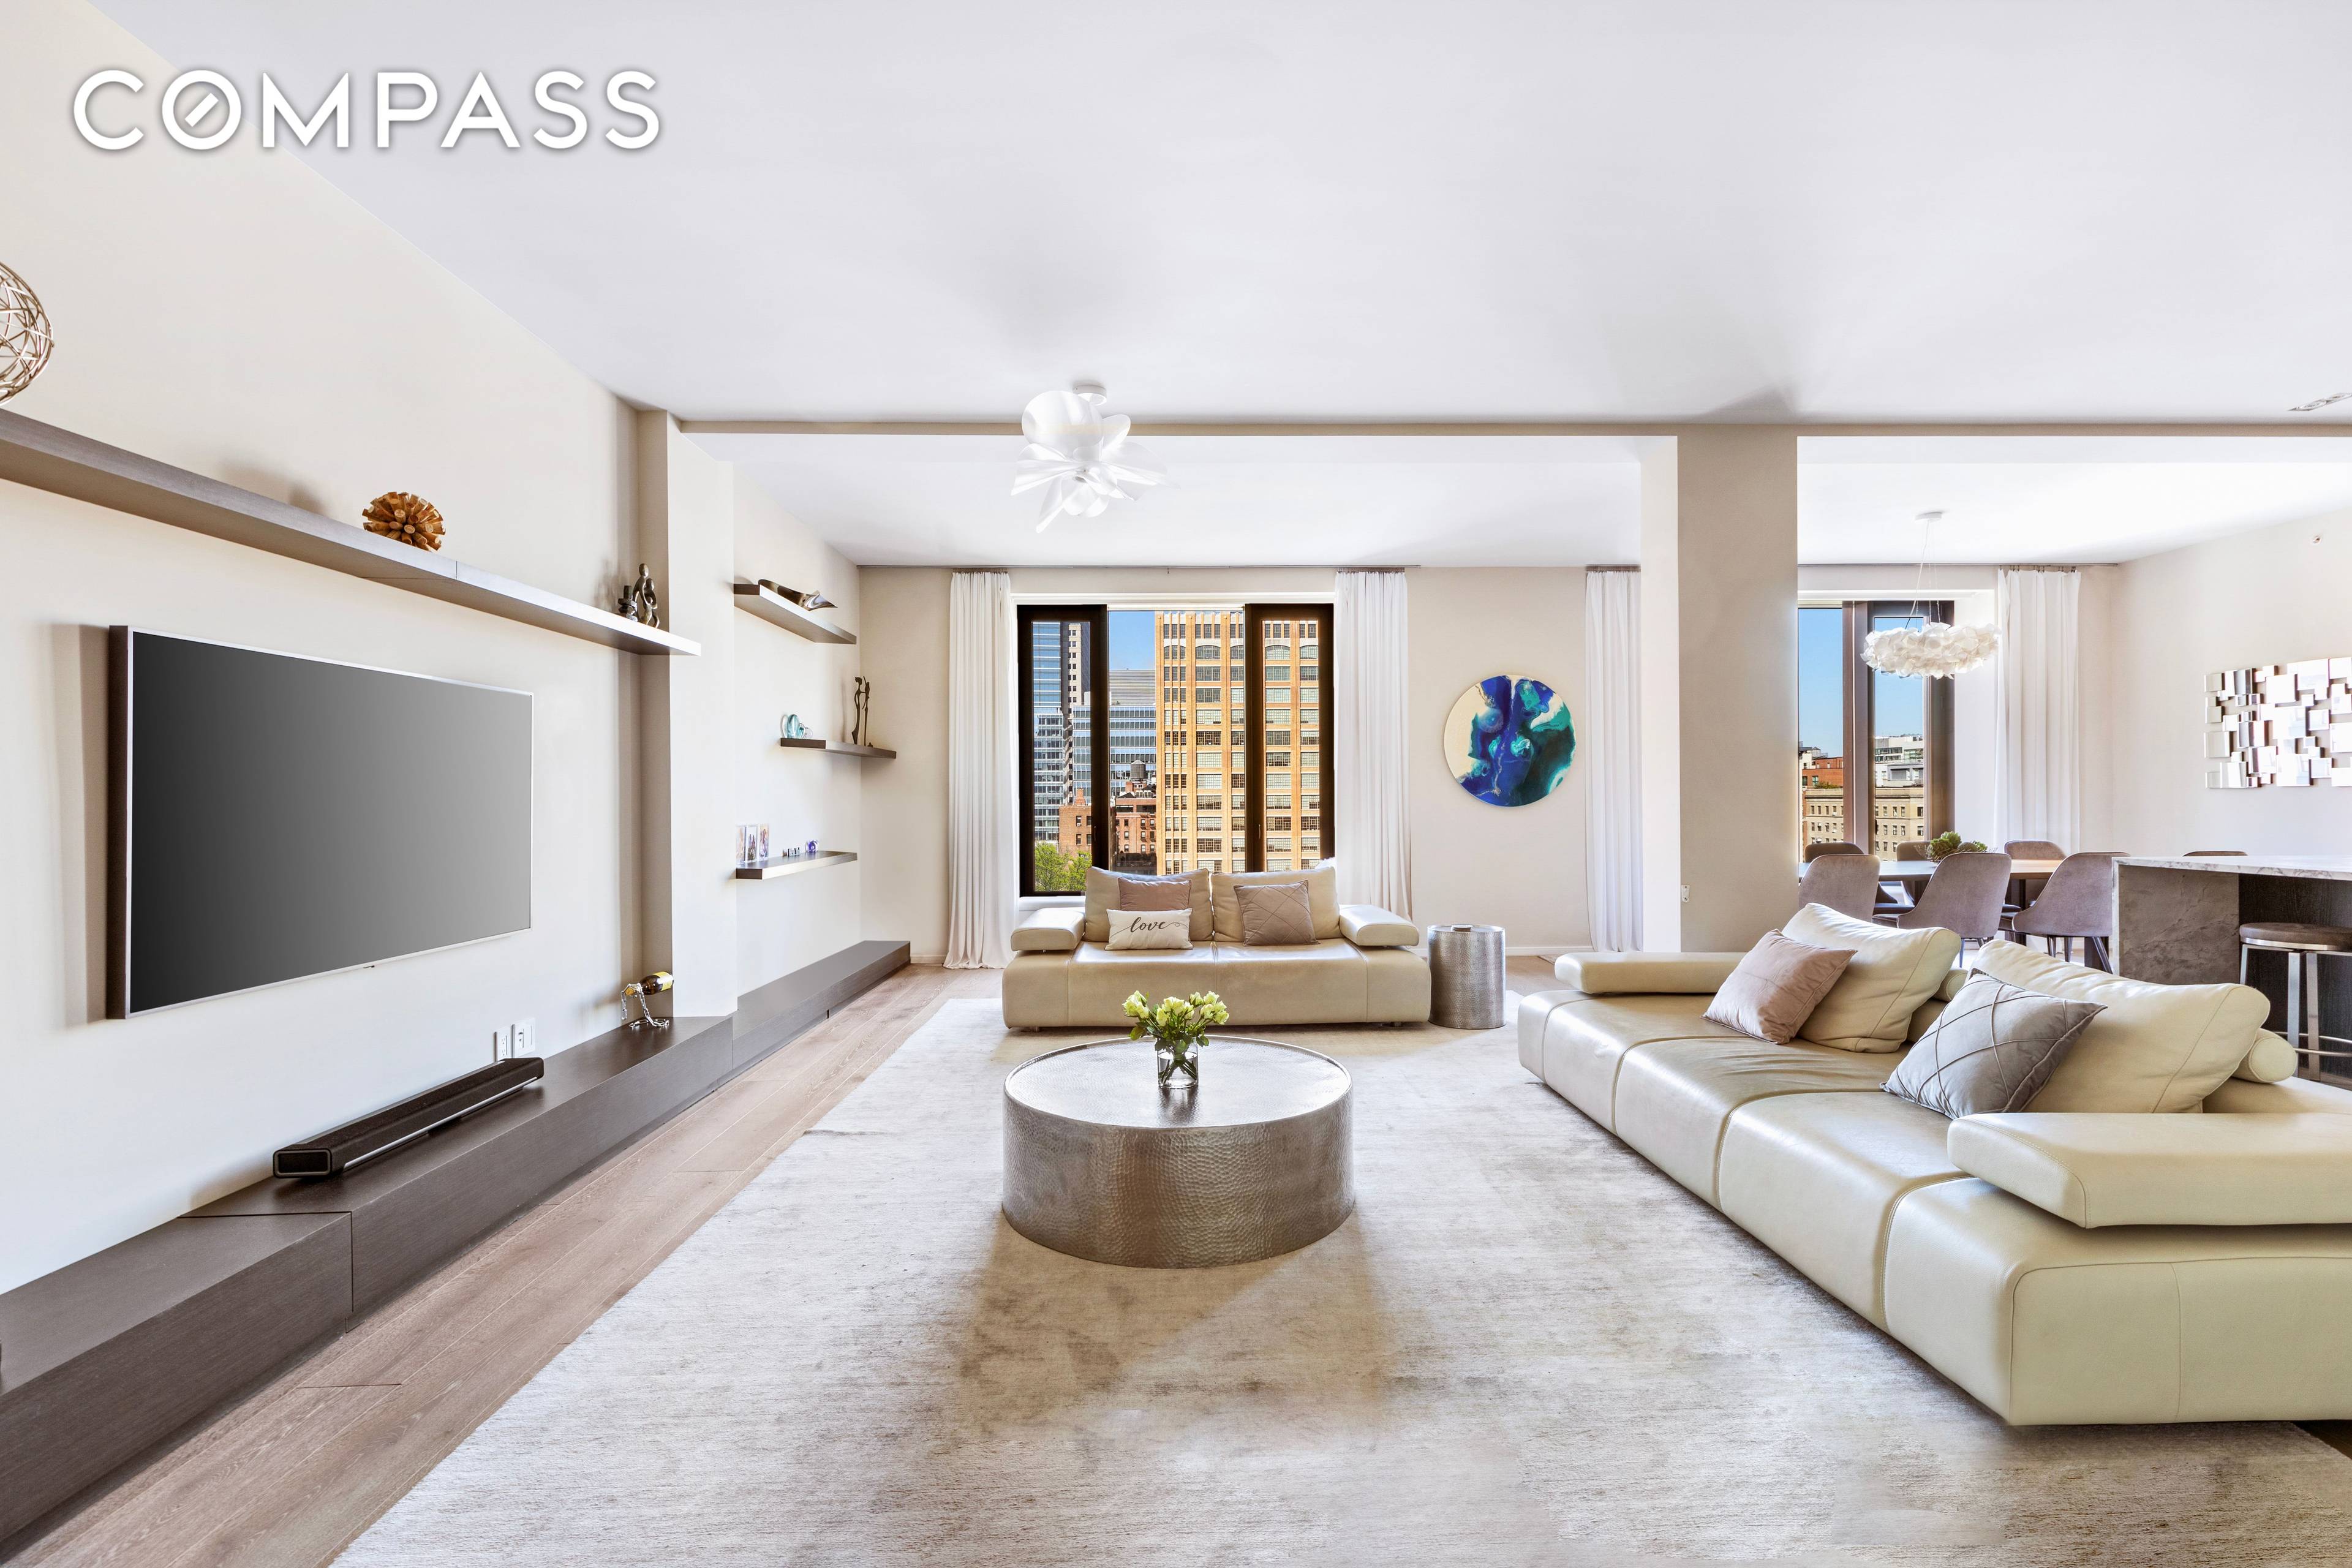 Extraordinary in every detail, this five bedroom, four and a half bathroom loft residence pairs exquisite interiors with breathtaking views in the perfect Tribeca location.